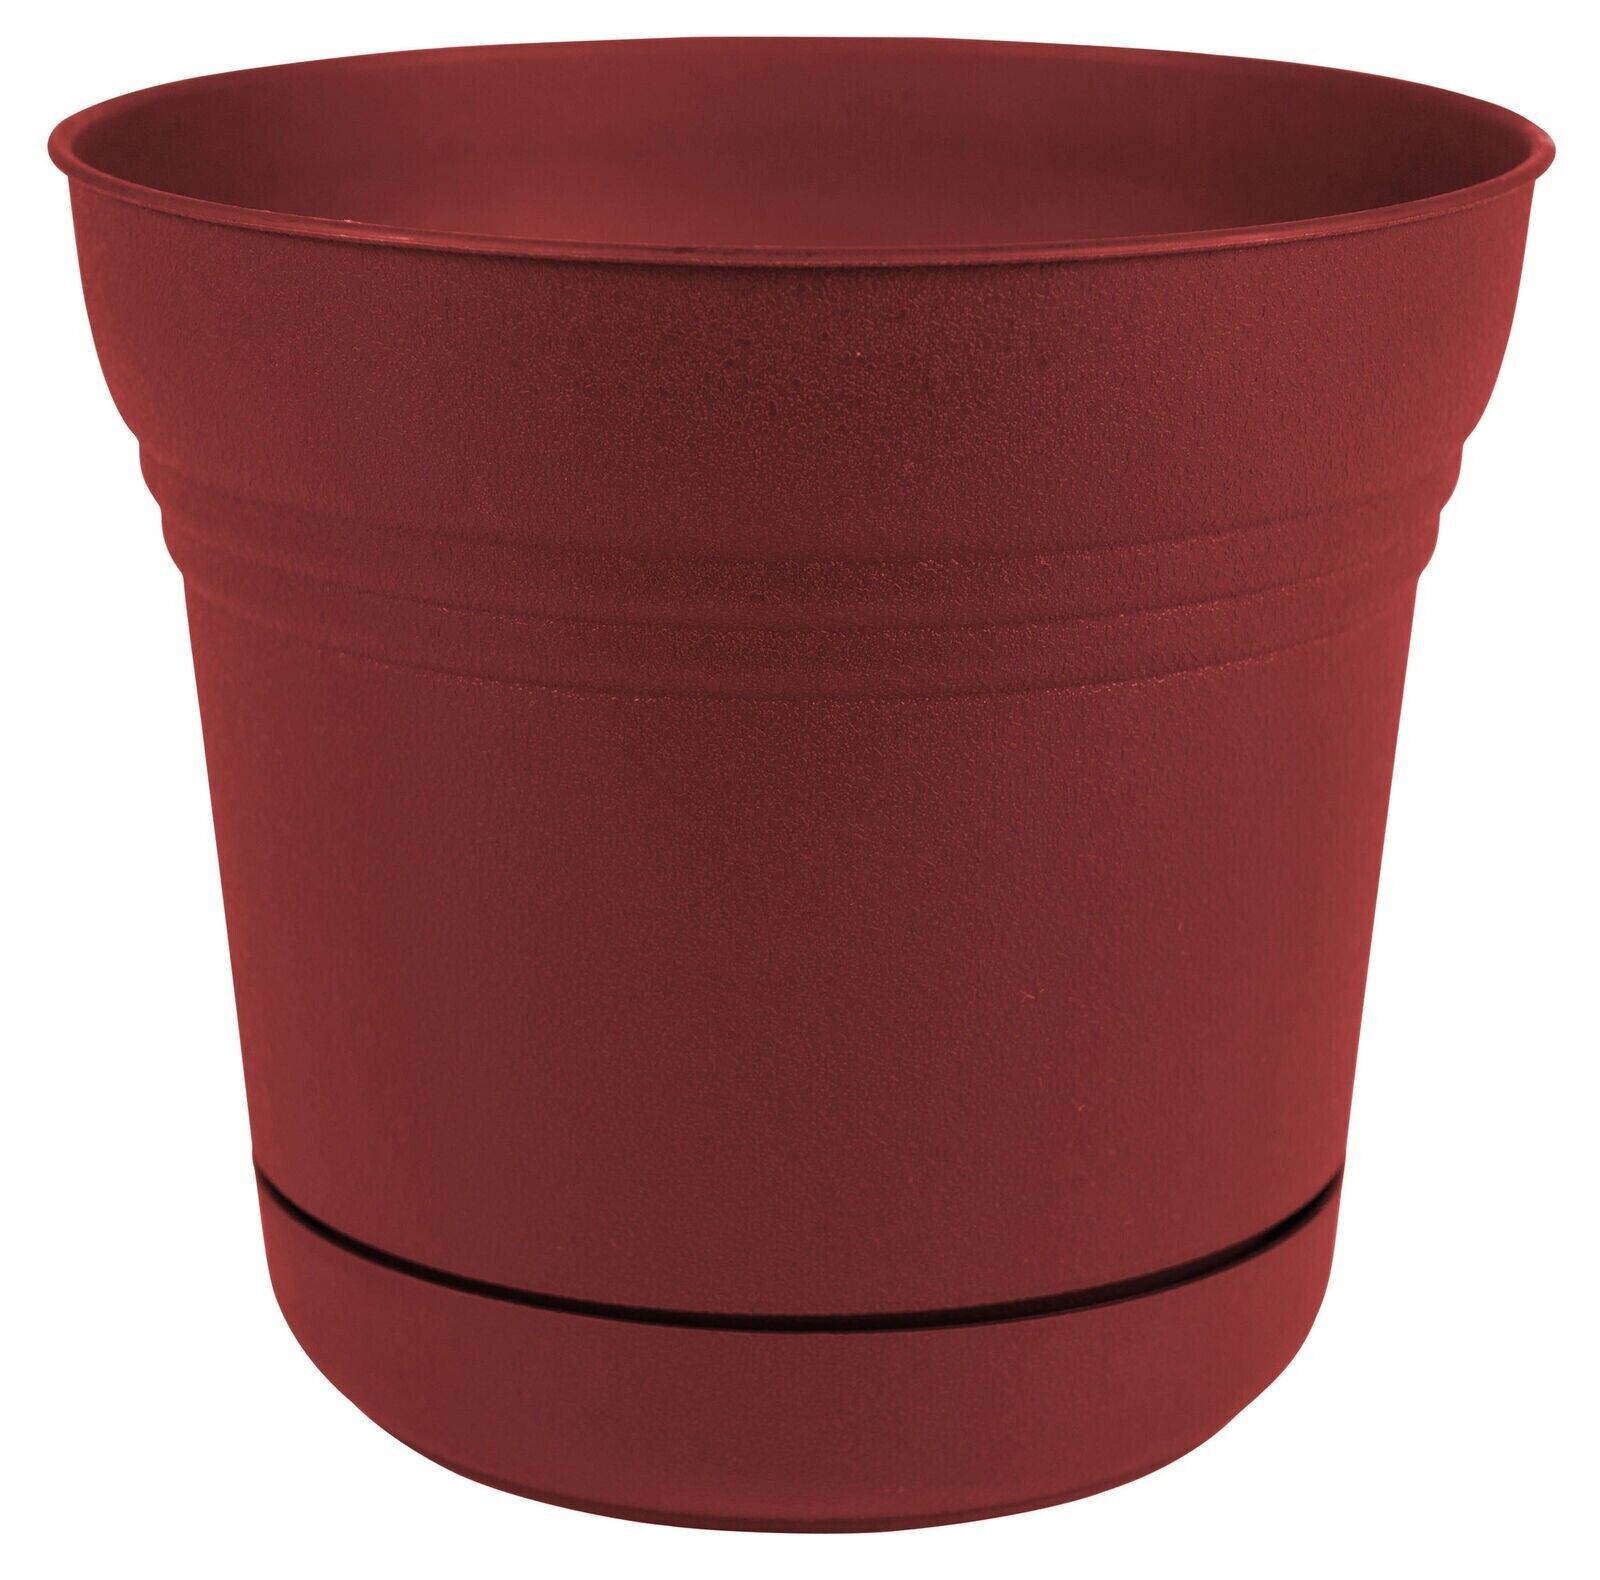 Primary image for Bloem 10.75'' in. H x 12'' in. W Plastic Saturn Planter Burnt, Red